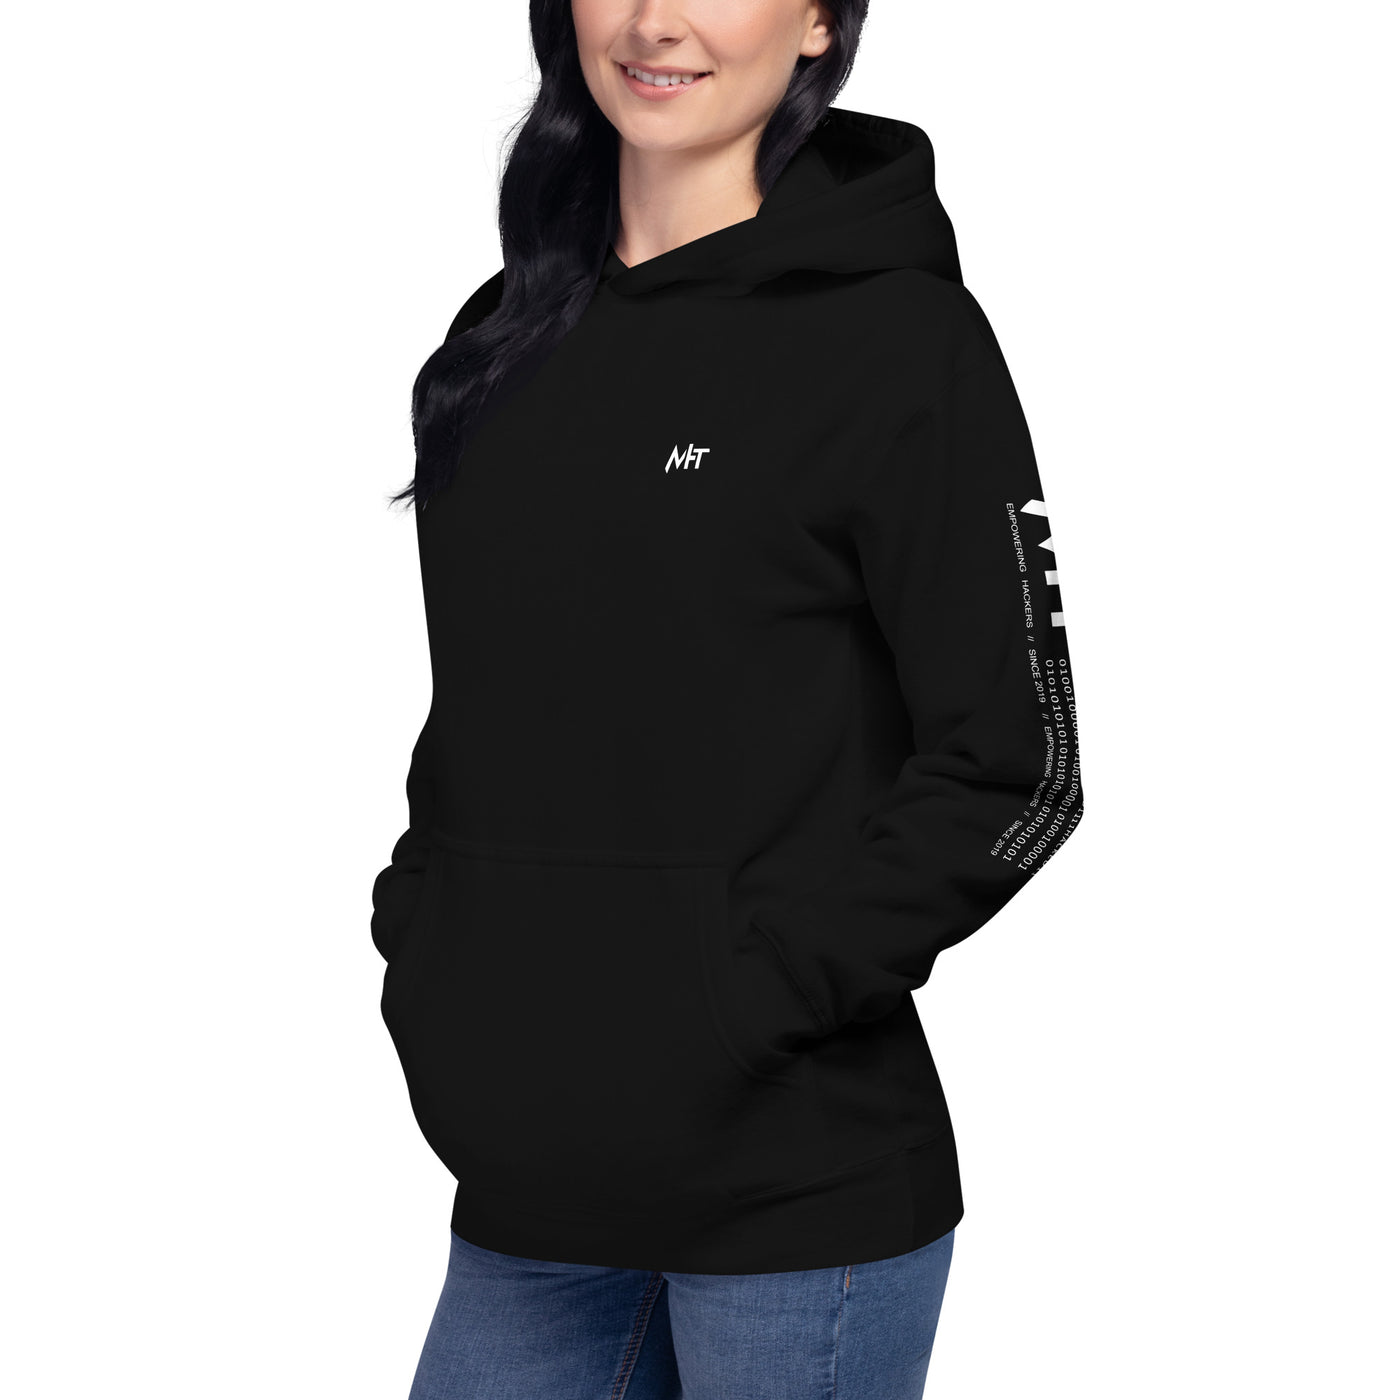 It's only a Gambling Problem, if I am losing - Unisex Hoodie( Back Print )